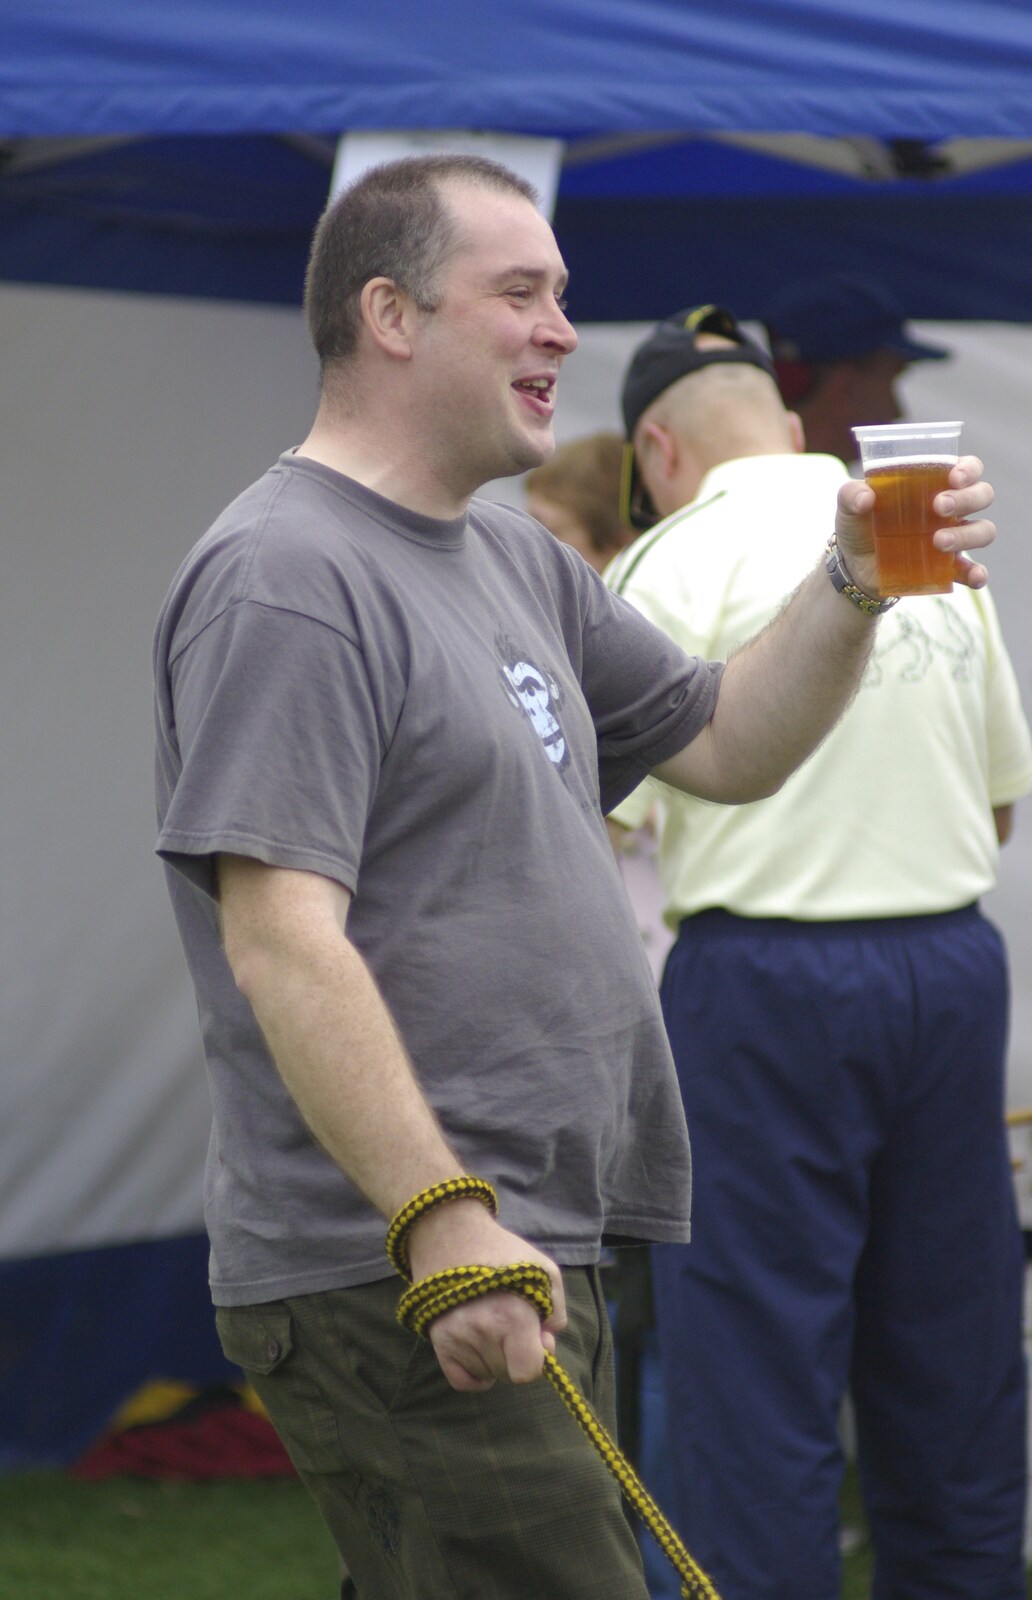 Qualcomm's Dragon-Boat Racing, Fen Ditton, Cambridge - 8th September 2007: Rob makes a toast